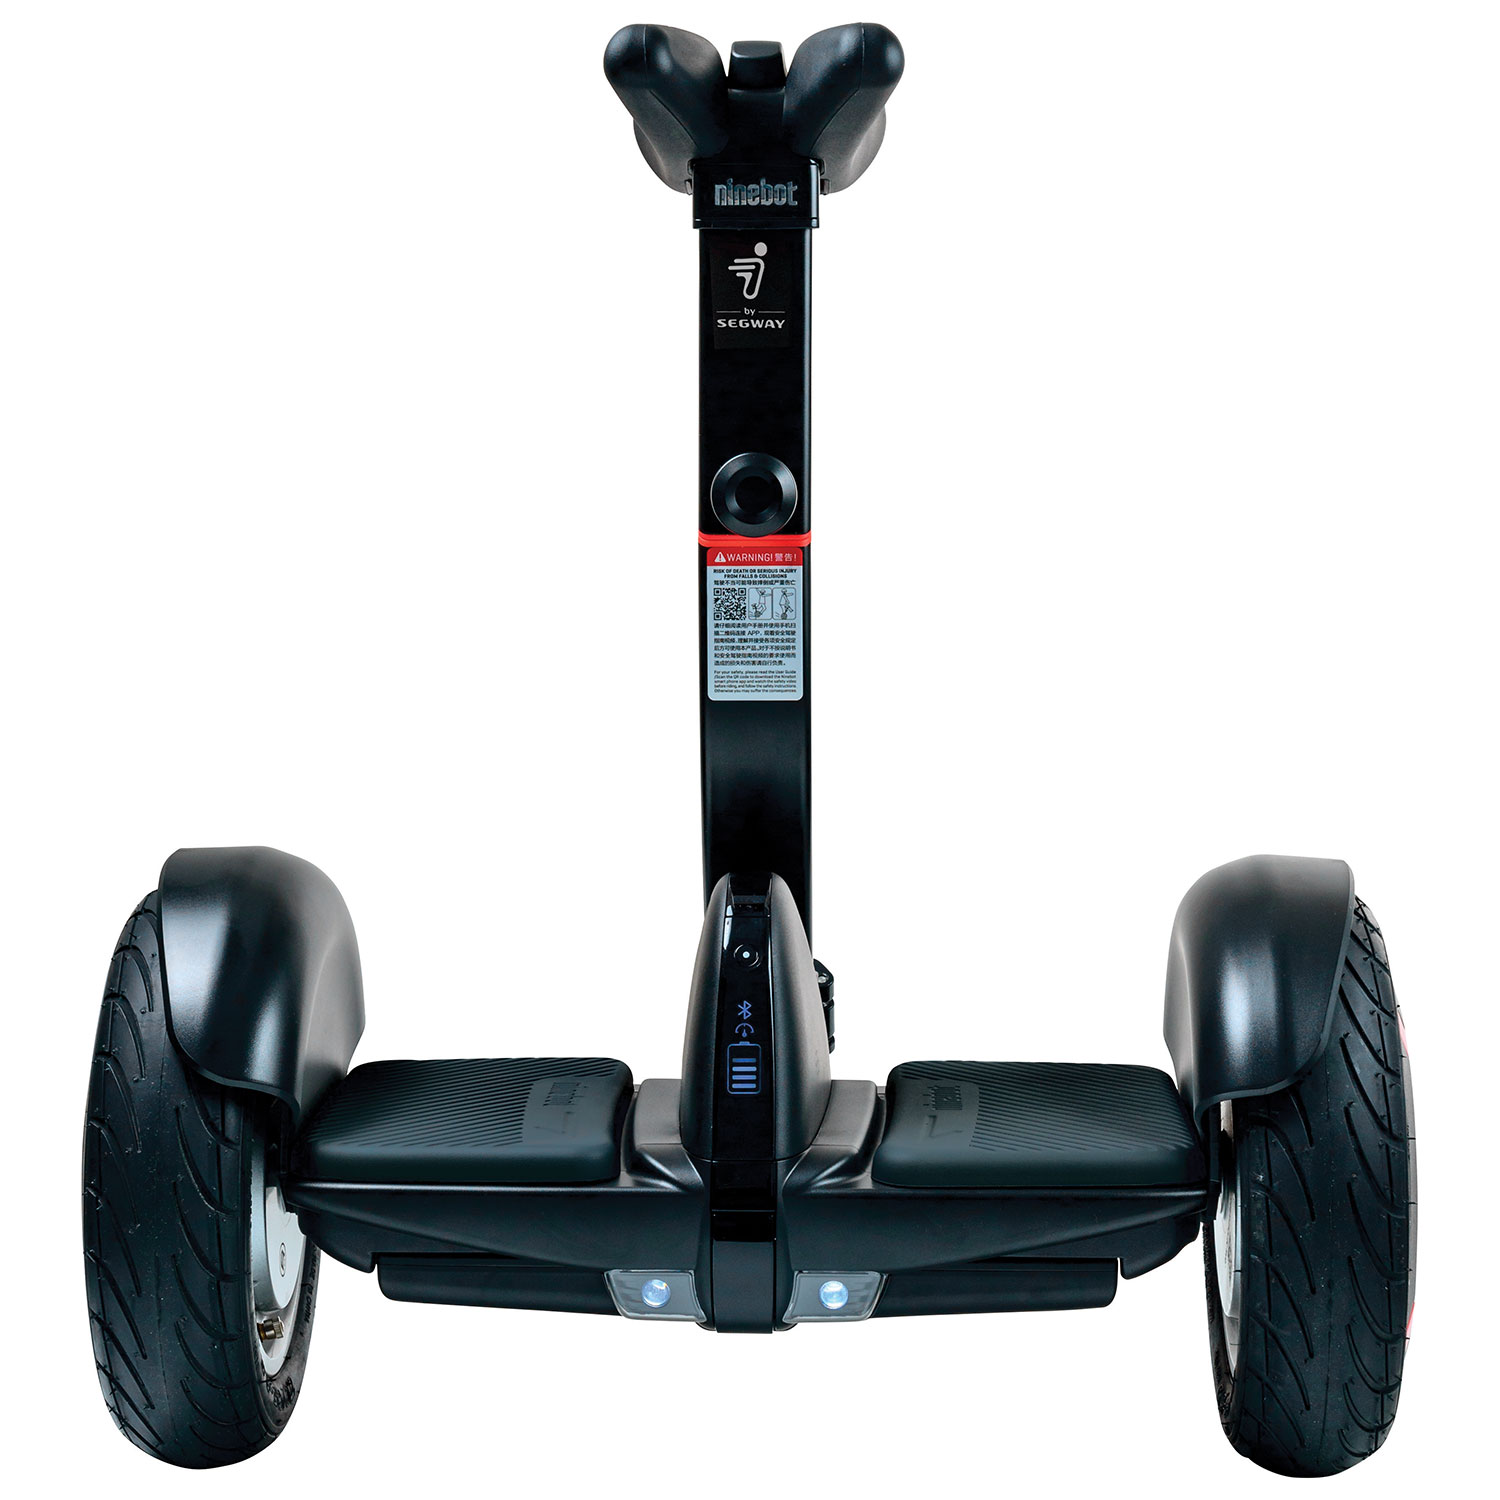 Segway miniPRO Smart Self Balancing Personal Transporter with Mobile App Control 12+ mile range and 260 Watt Hours - image 3 of 4